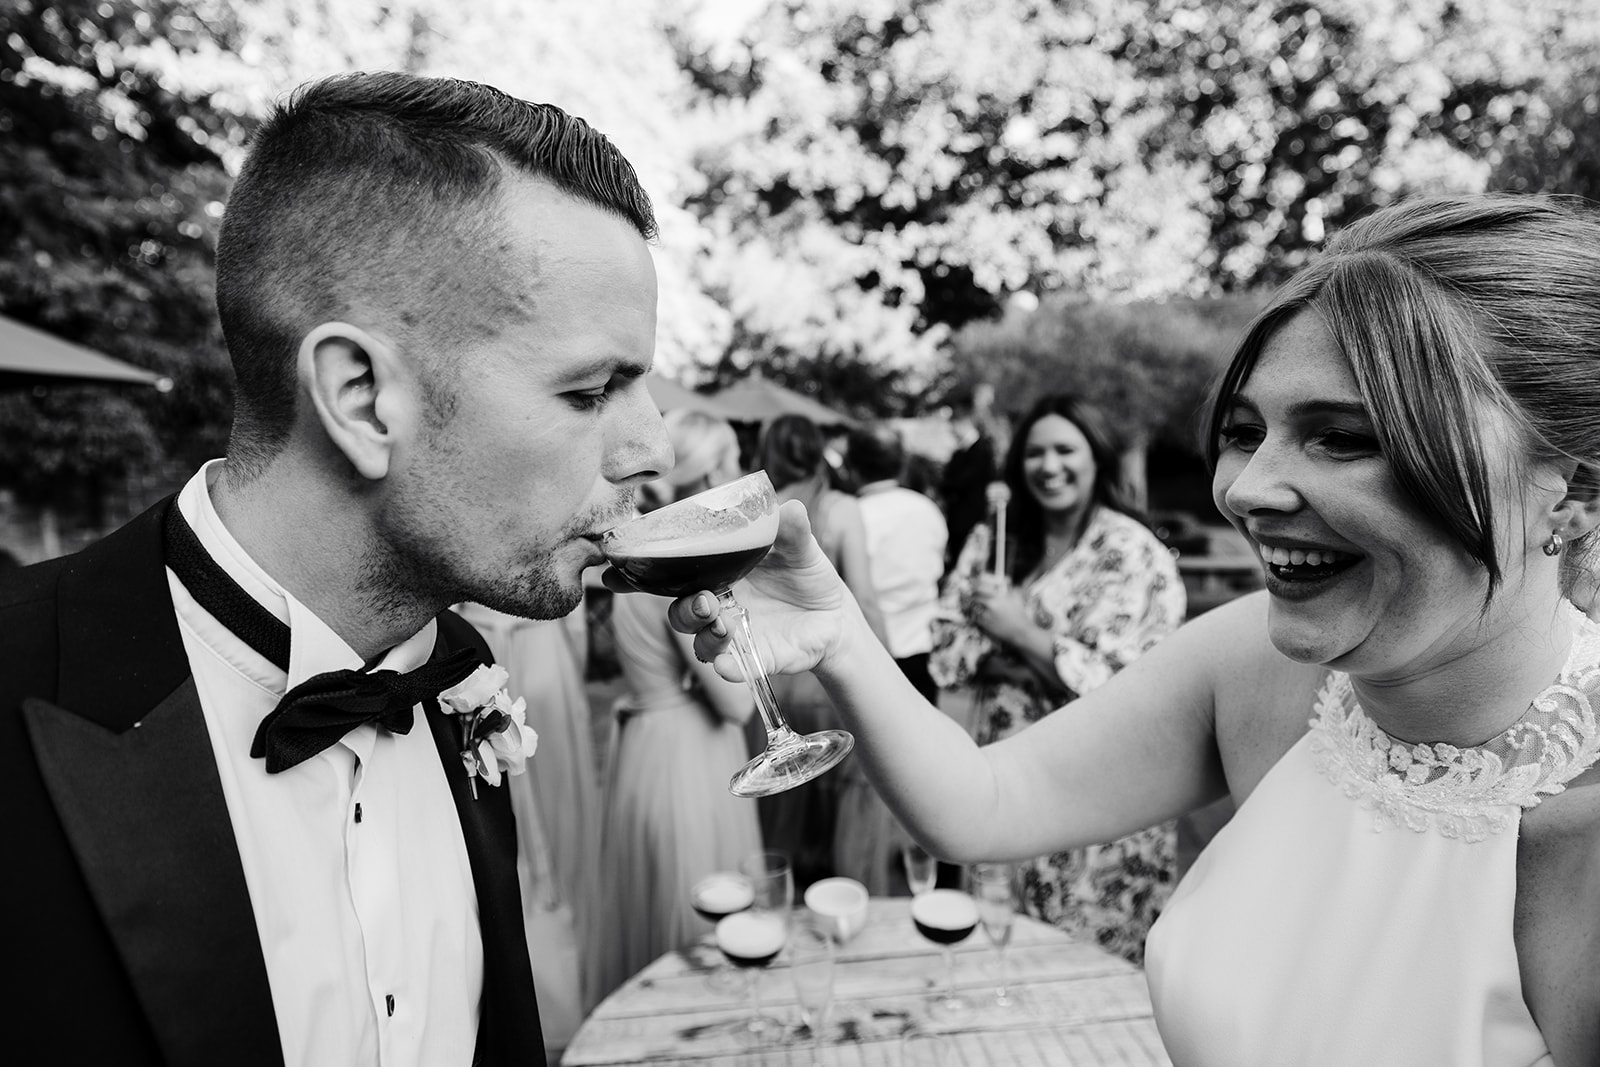 Groom takes sip of cocktail from bride, in black and white 